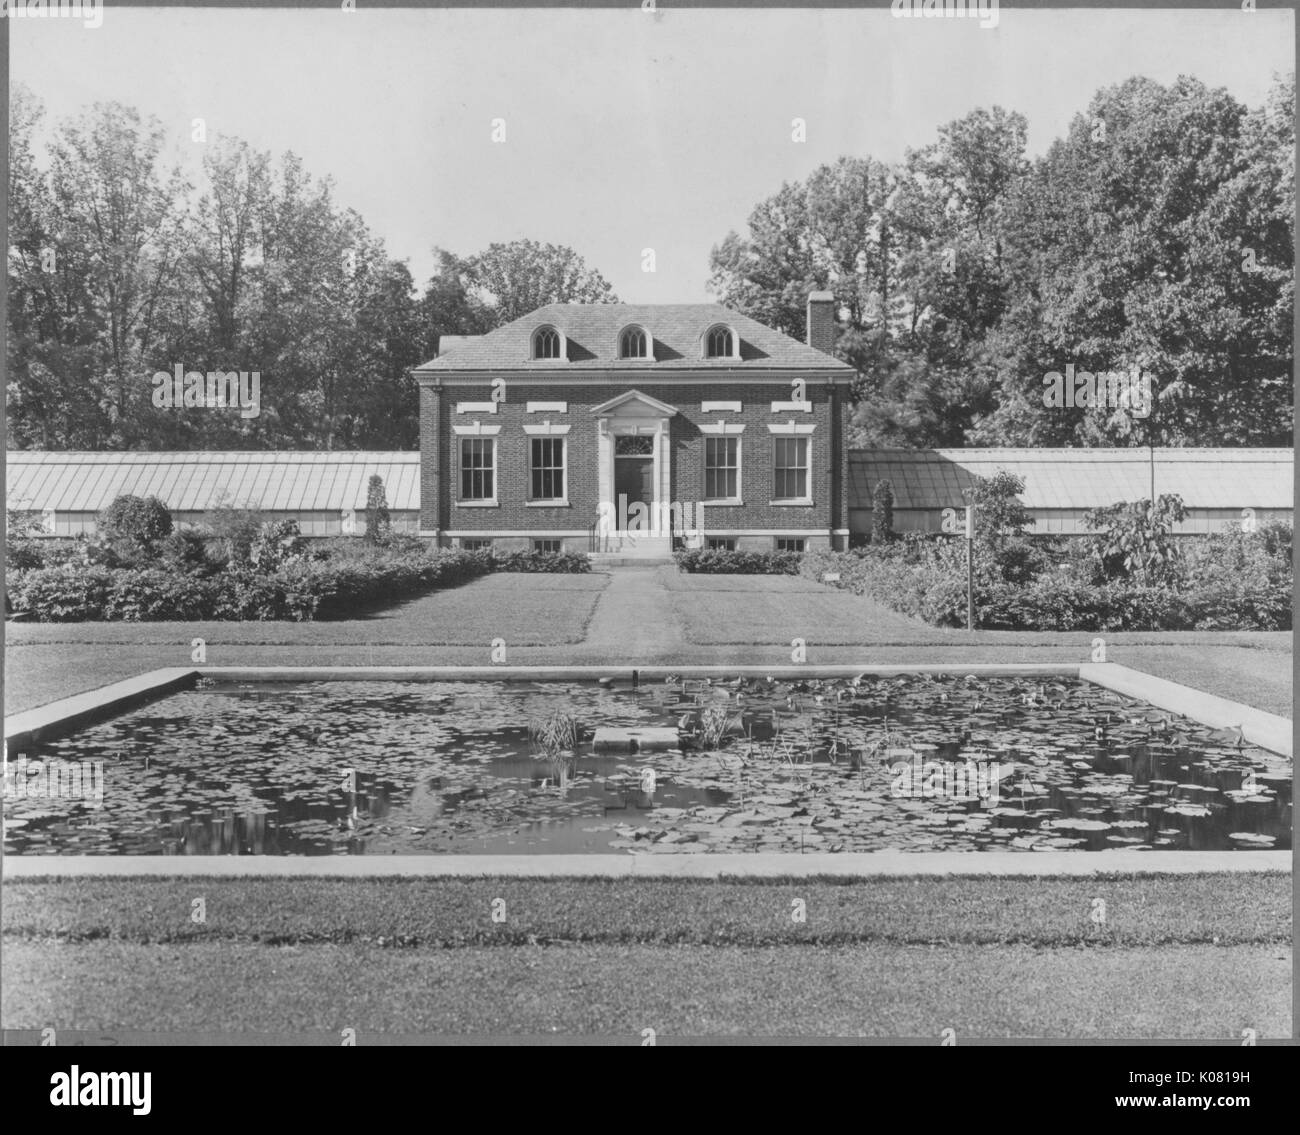 Photograph of the exterior of a brick home featuring standard and dormer windows, a small staircase leading to an entryway, and chimneys, situated in an elaborately landscaped lawn with a reflecting pool, dense trees behind the home, in a quiet residential area of Baltimore, Maryland, 1910. This image is from a series documenting the construction and sale of homes in the Roland Park/Guilford neighborhood of Baltimore, a streetcar suburb and one of the first planned communities in the United States. Stock Photo